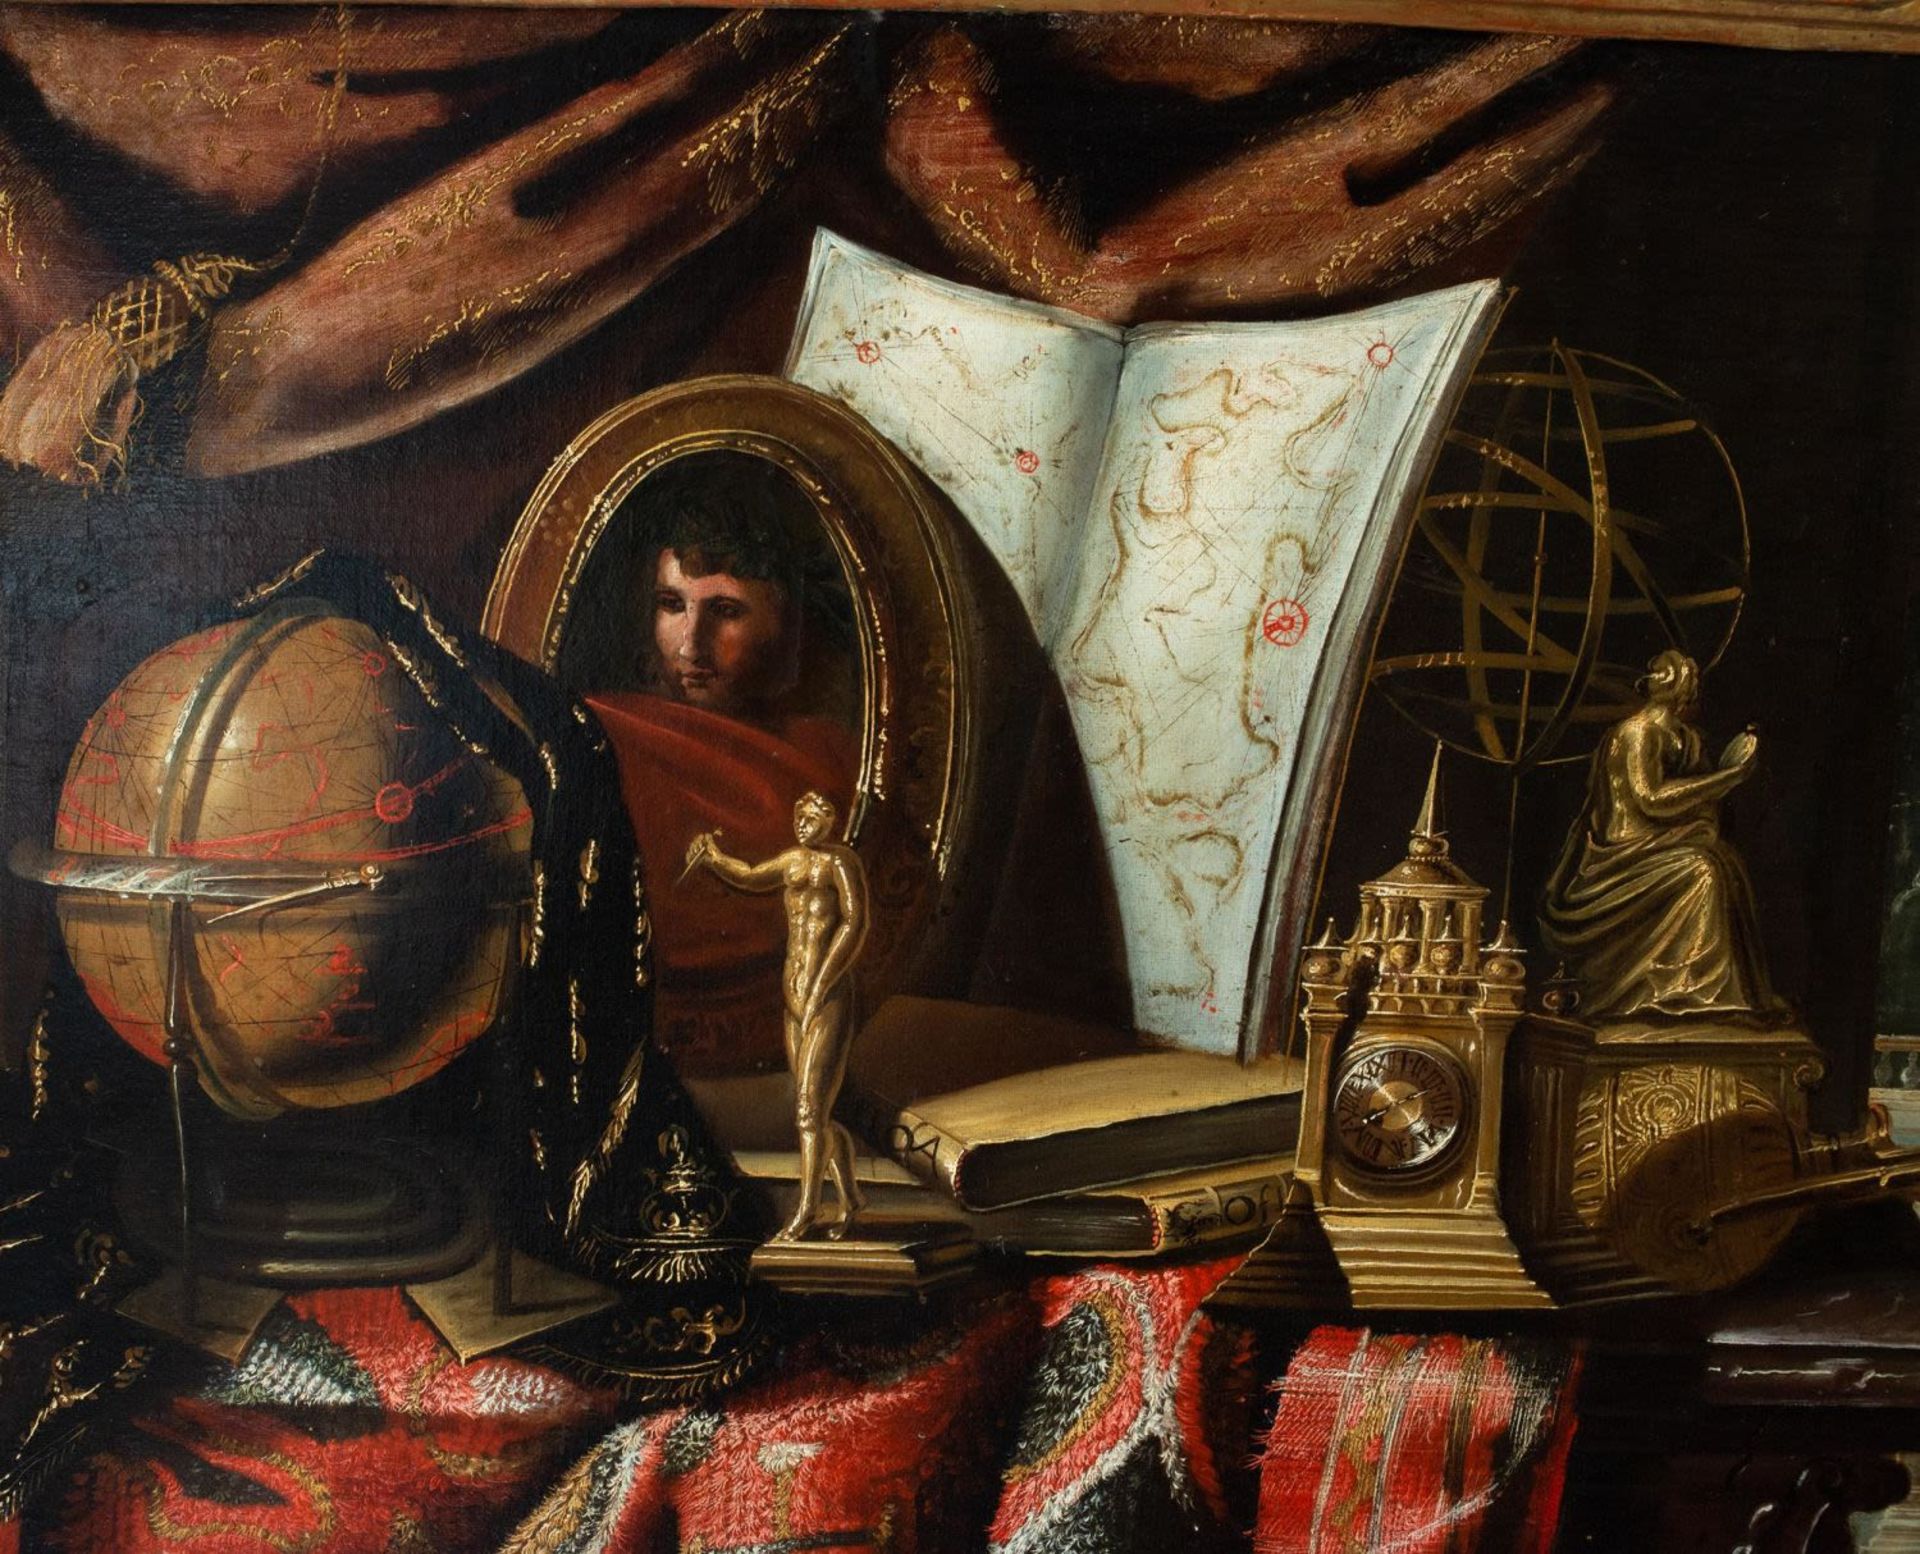 FRANCESCO NOLETTI, CALLED IL MALTESE (VALLETTA C. 1611 - ROME, 1654), LARGE PAIR OF STILL LIFES WITH - Image 11 of 21